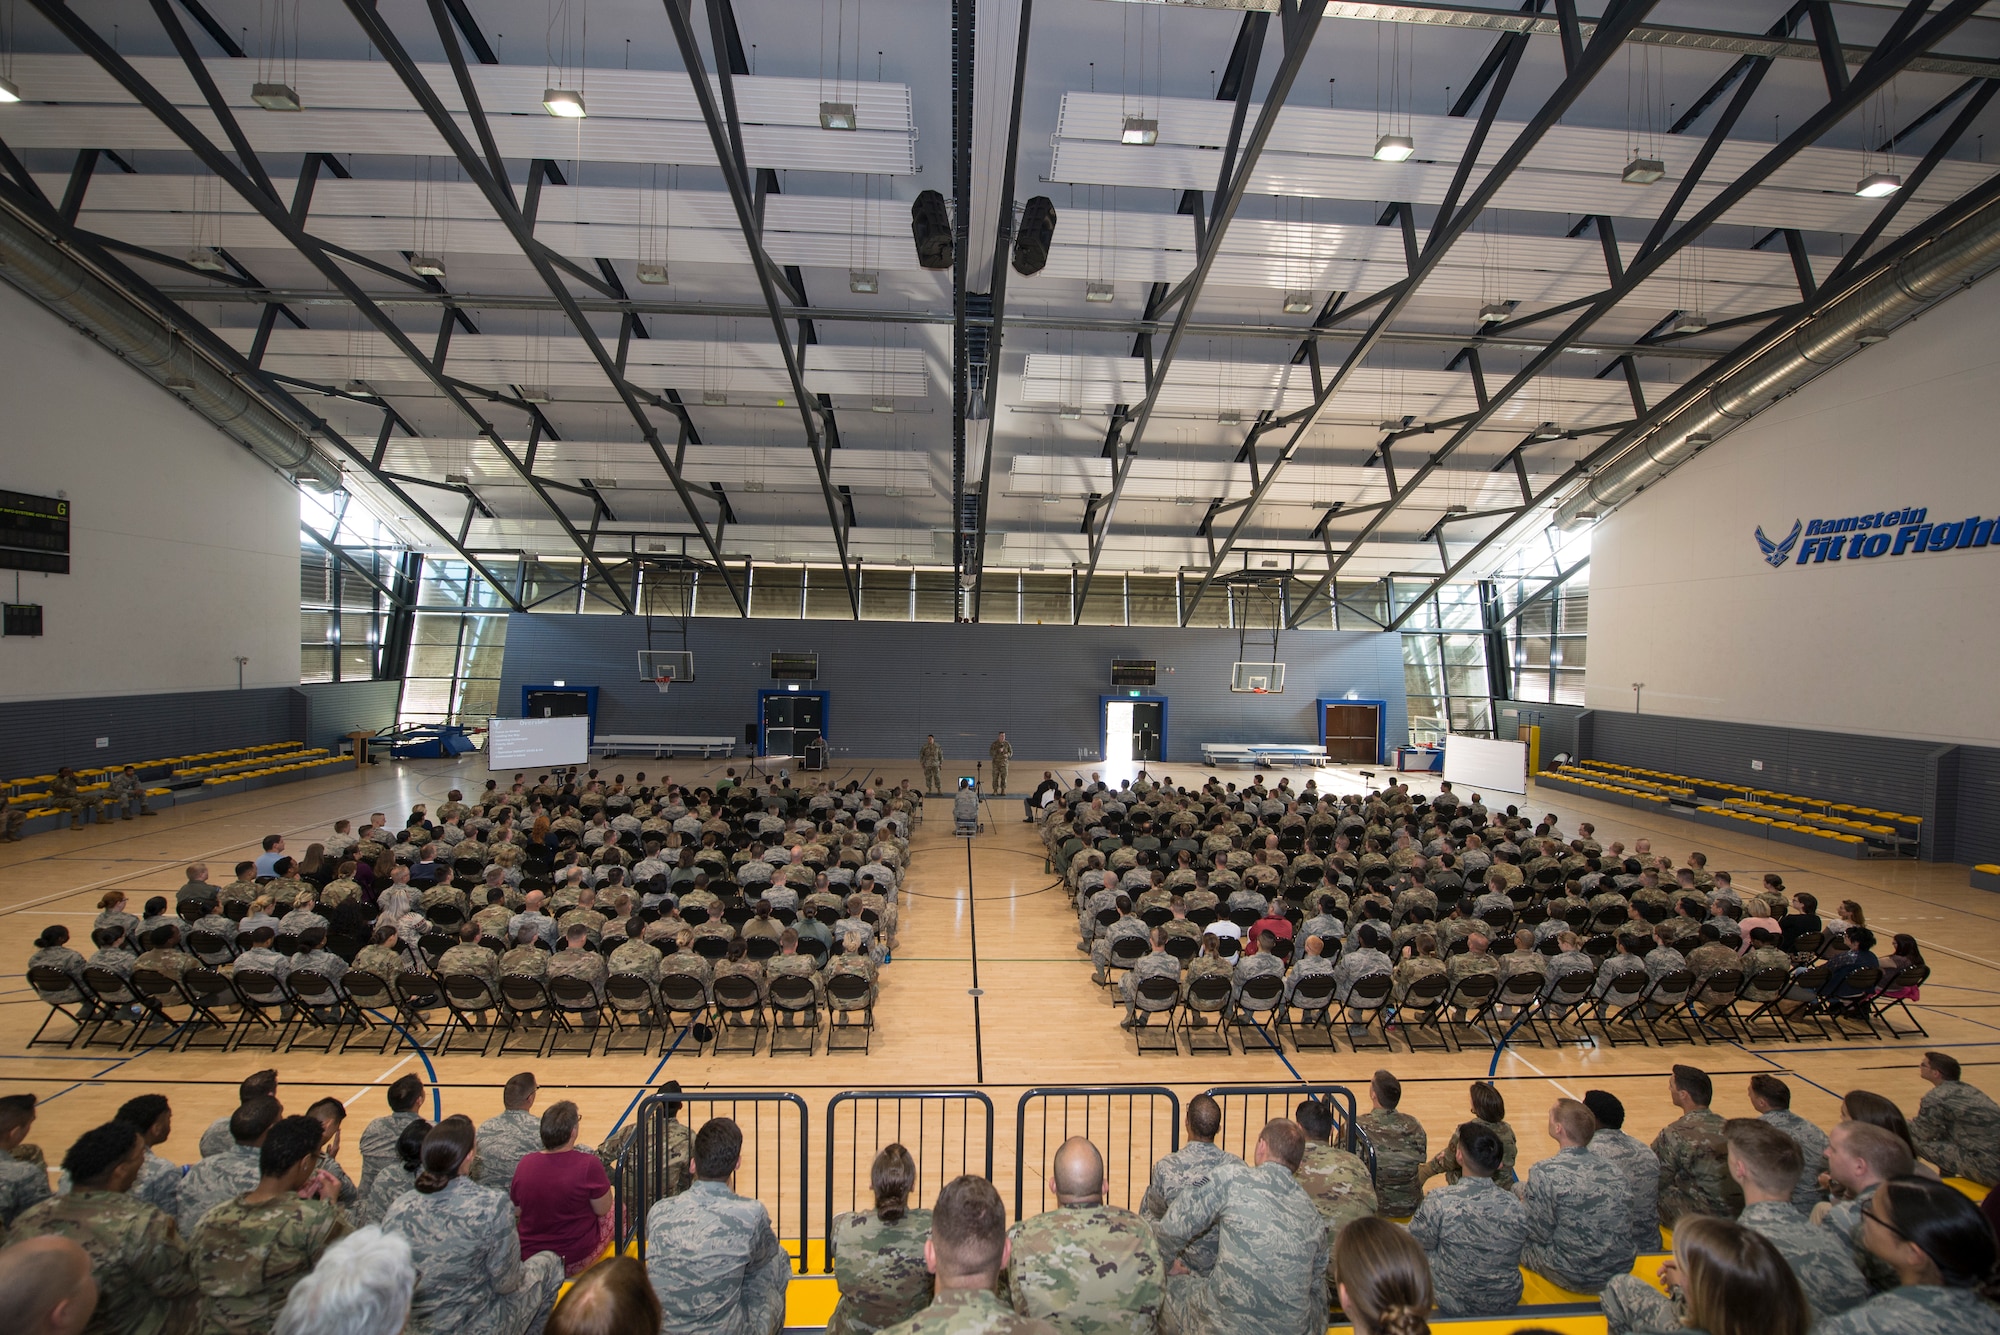 U.S. Air Force Brig. Gen. Mark R. August, 86th Airlift Wing commander, and Chief Master Sgt. Ernesto Rendon, 86th AW command chief, speak to Airmen at an all-call at Ramstein Air Base, Germany, Sept. 17, 2019. August and Rendon discussed accomplishments of the 86th AW in 2019, preparation for Operation Varsity 19-03 and 19-04, and the upcoming Unit Effectiveness Inspection.